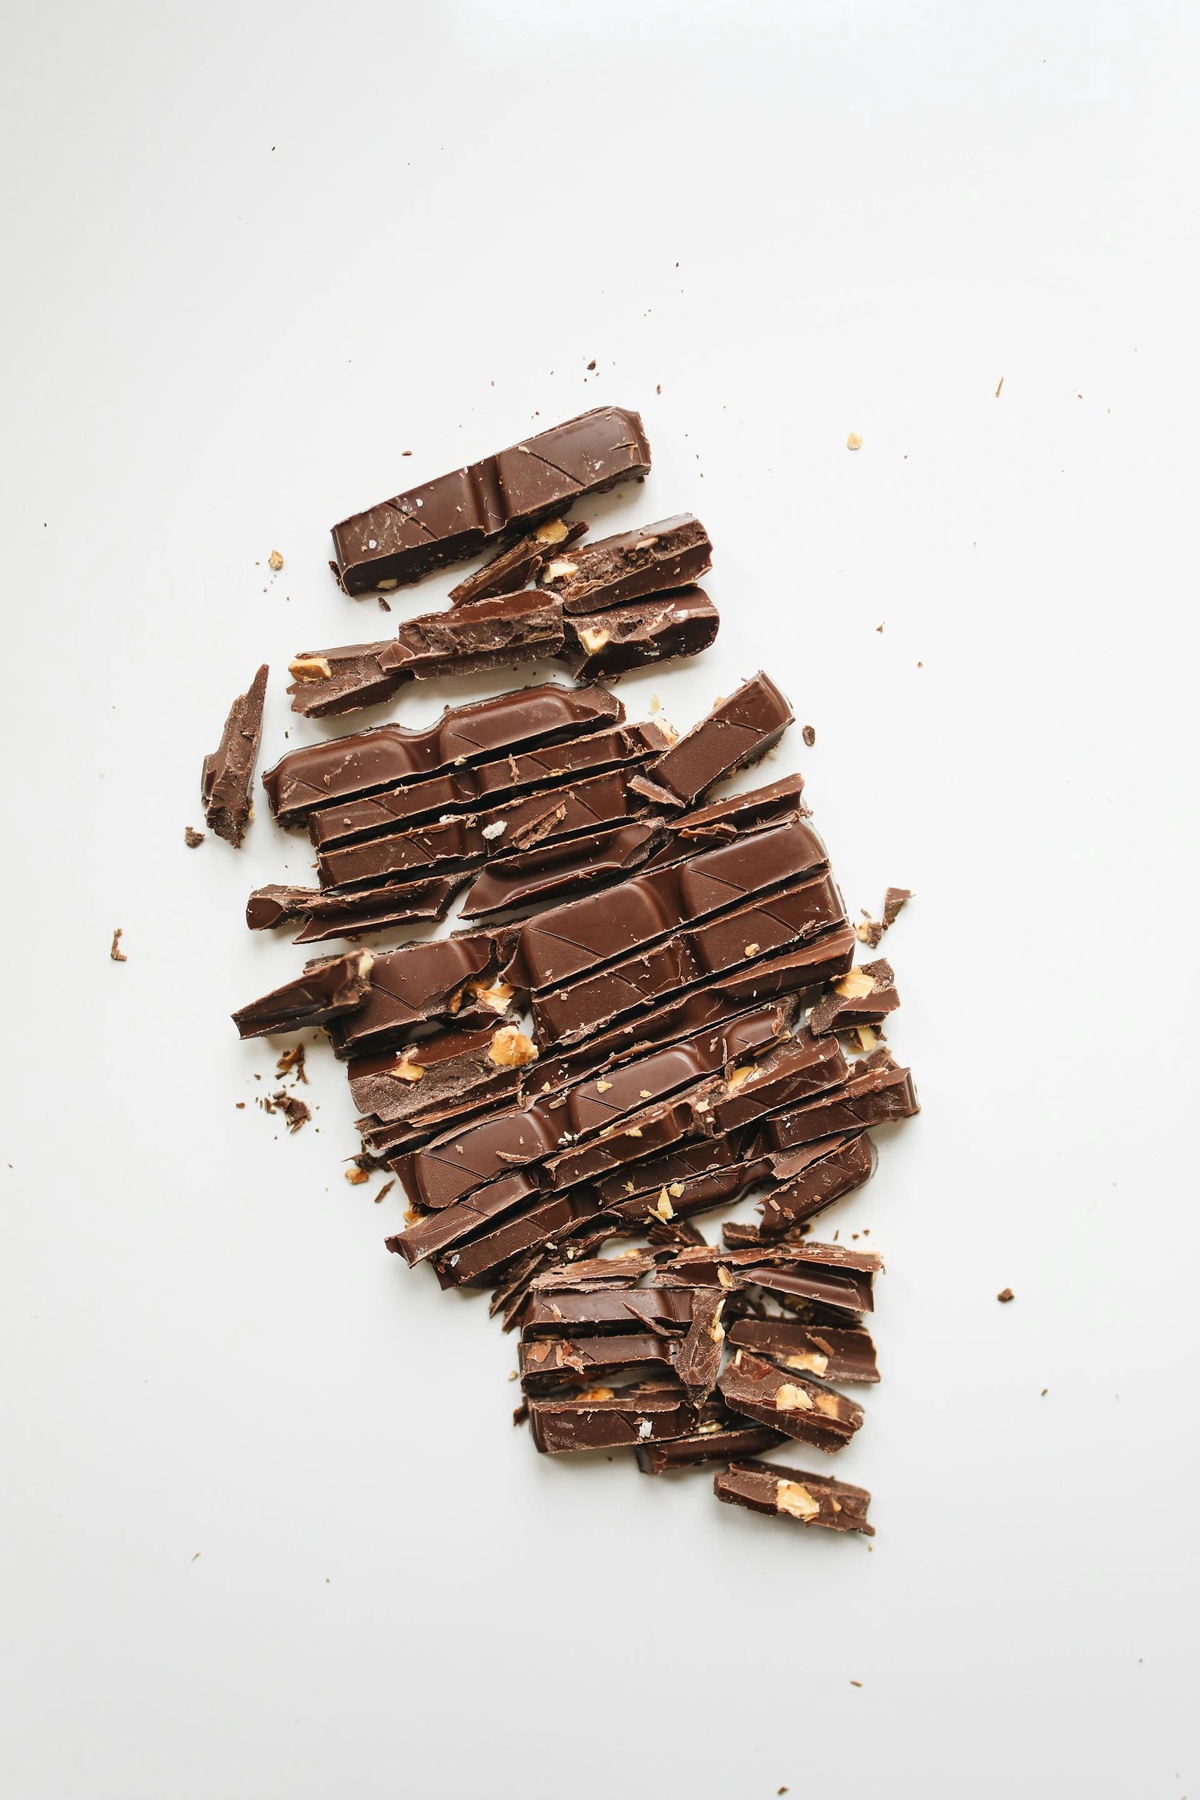 Dark Chocolate vs White Chocolate: Which is the Sweetest Choice for Your Health?